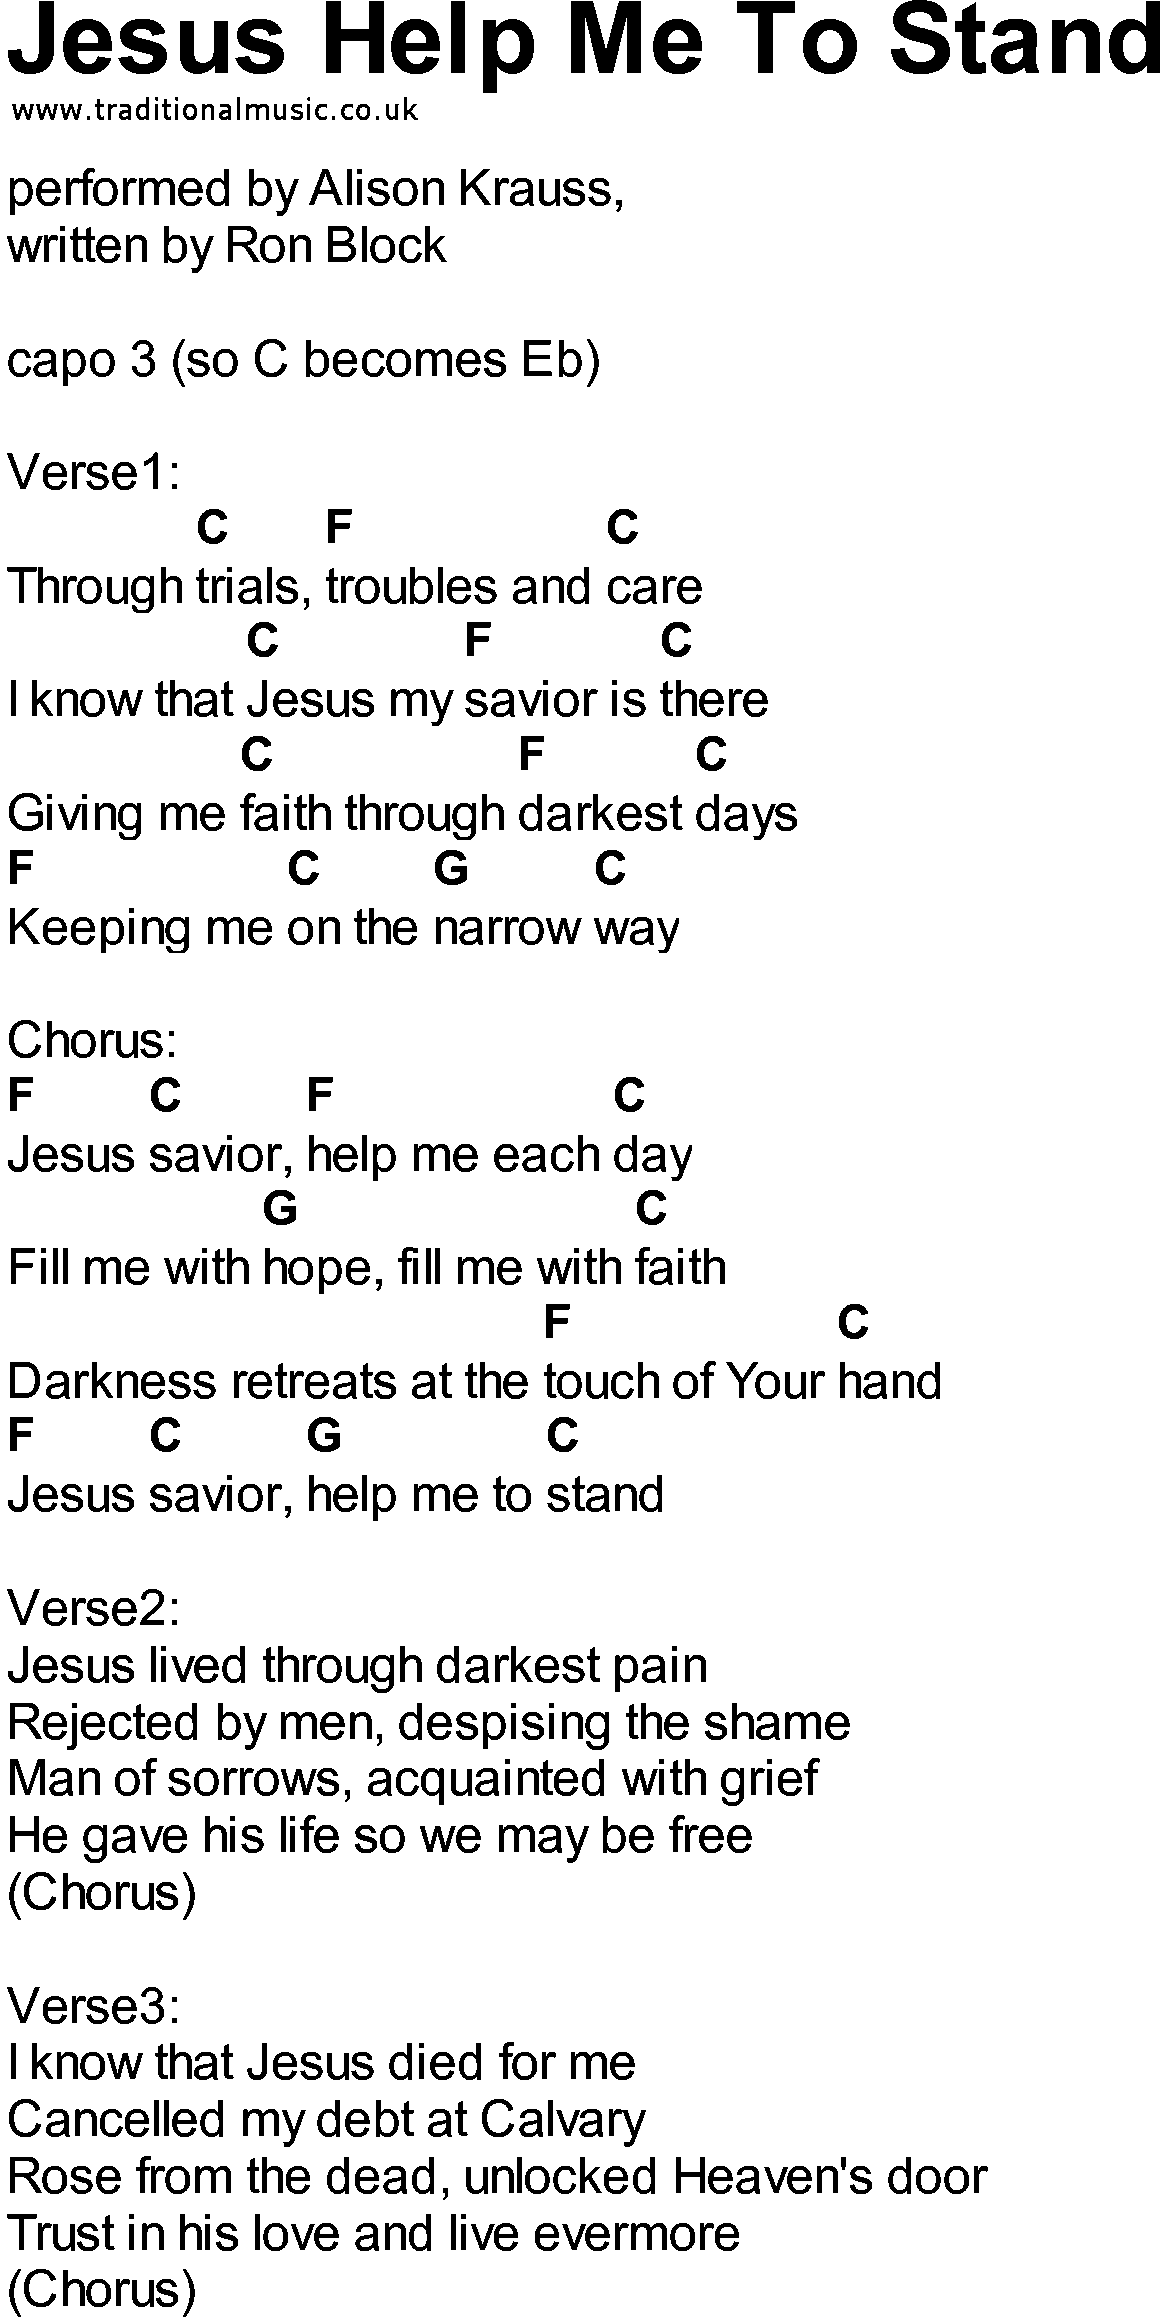 Bluegrass songs with chords - Jesus Help Me To Stand